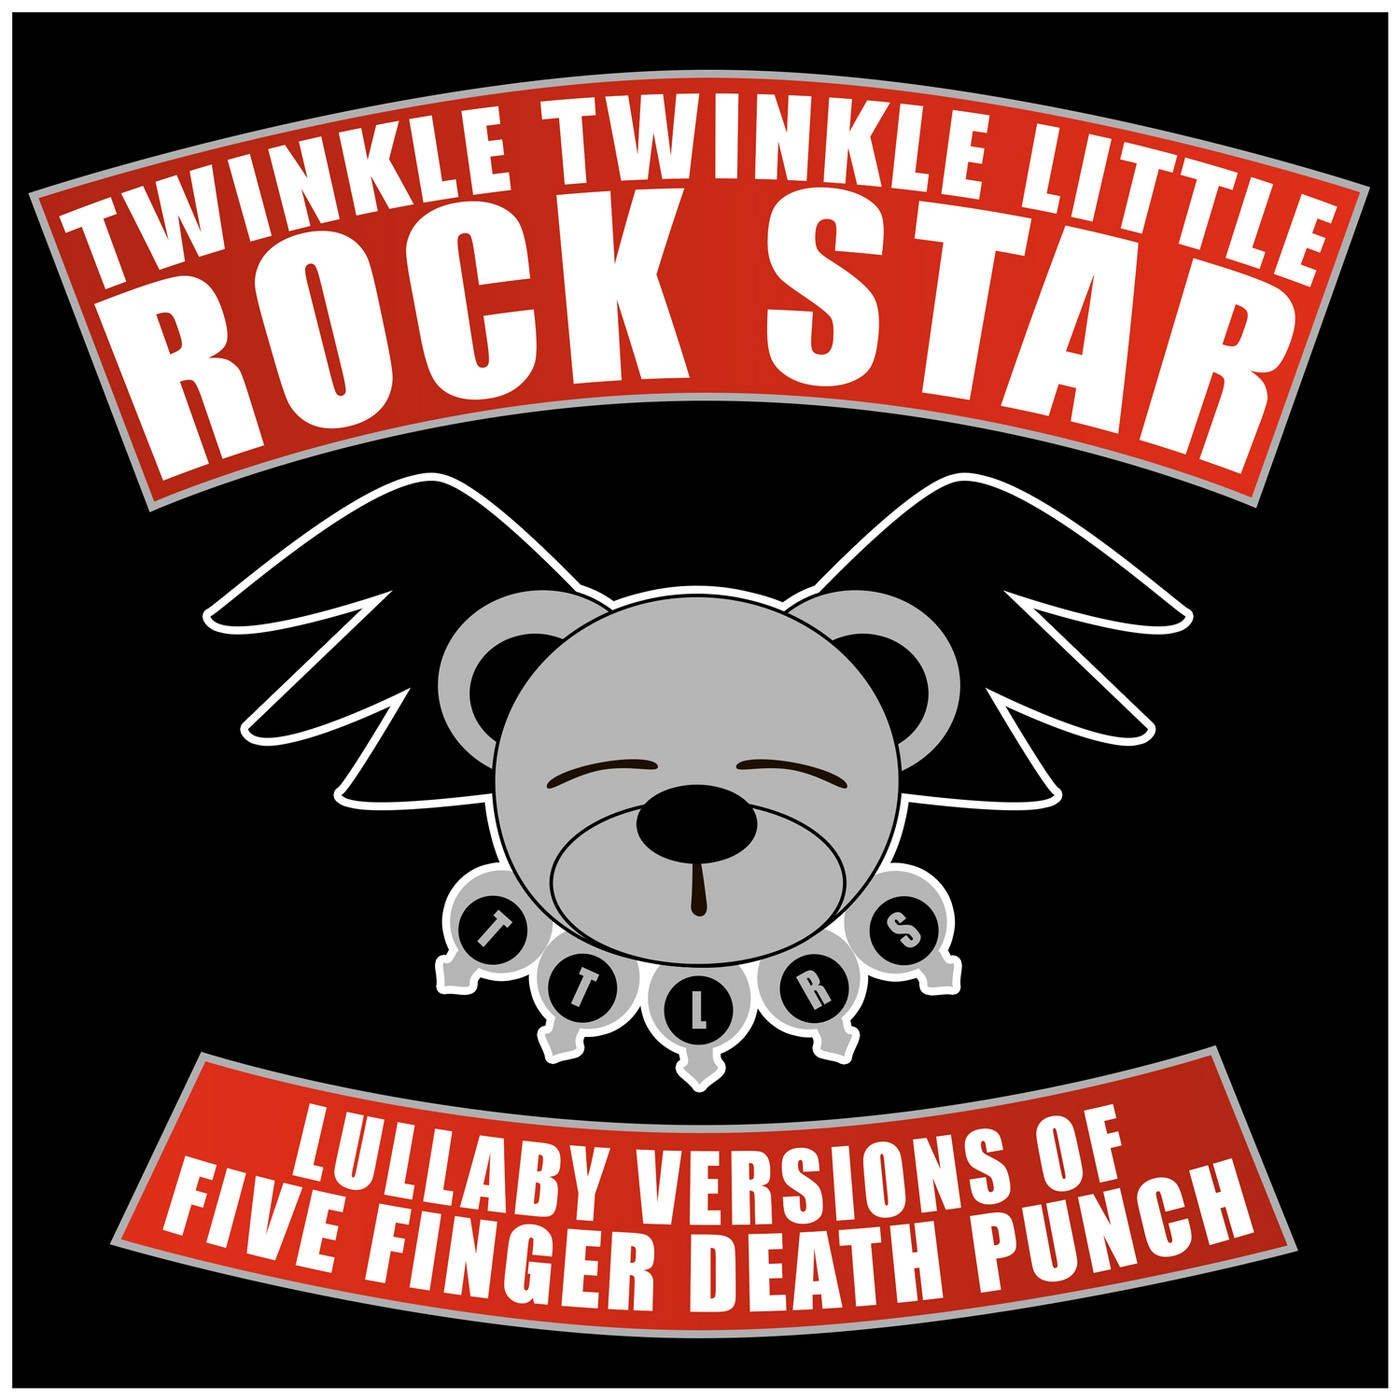 Lullaby Versions Of Five Finger Death Punch